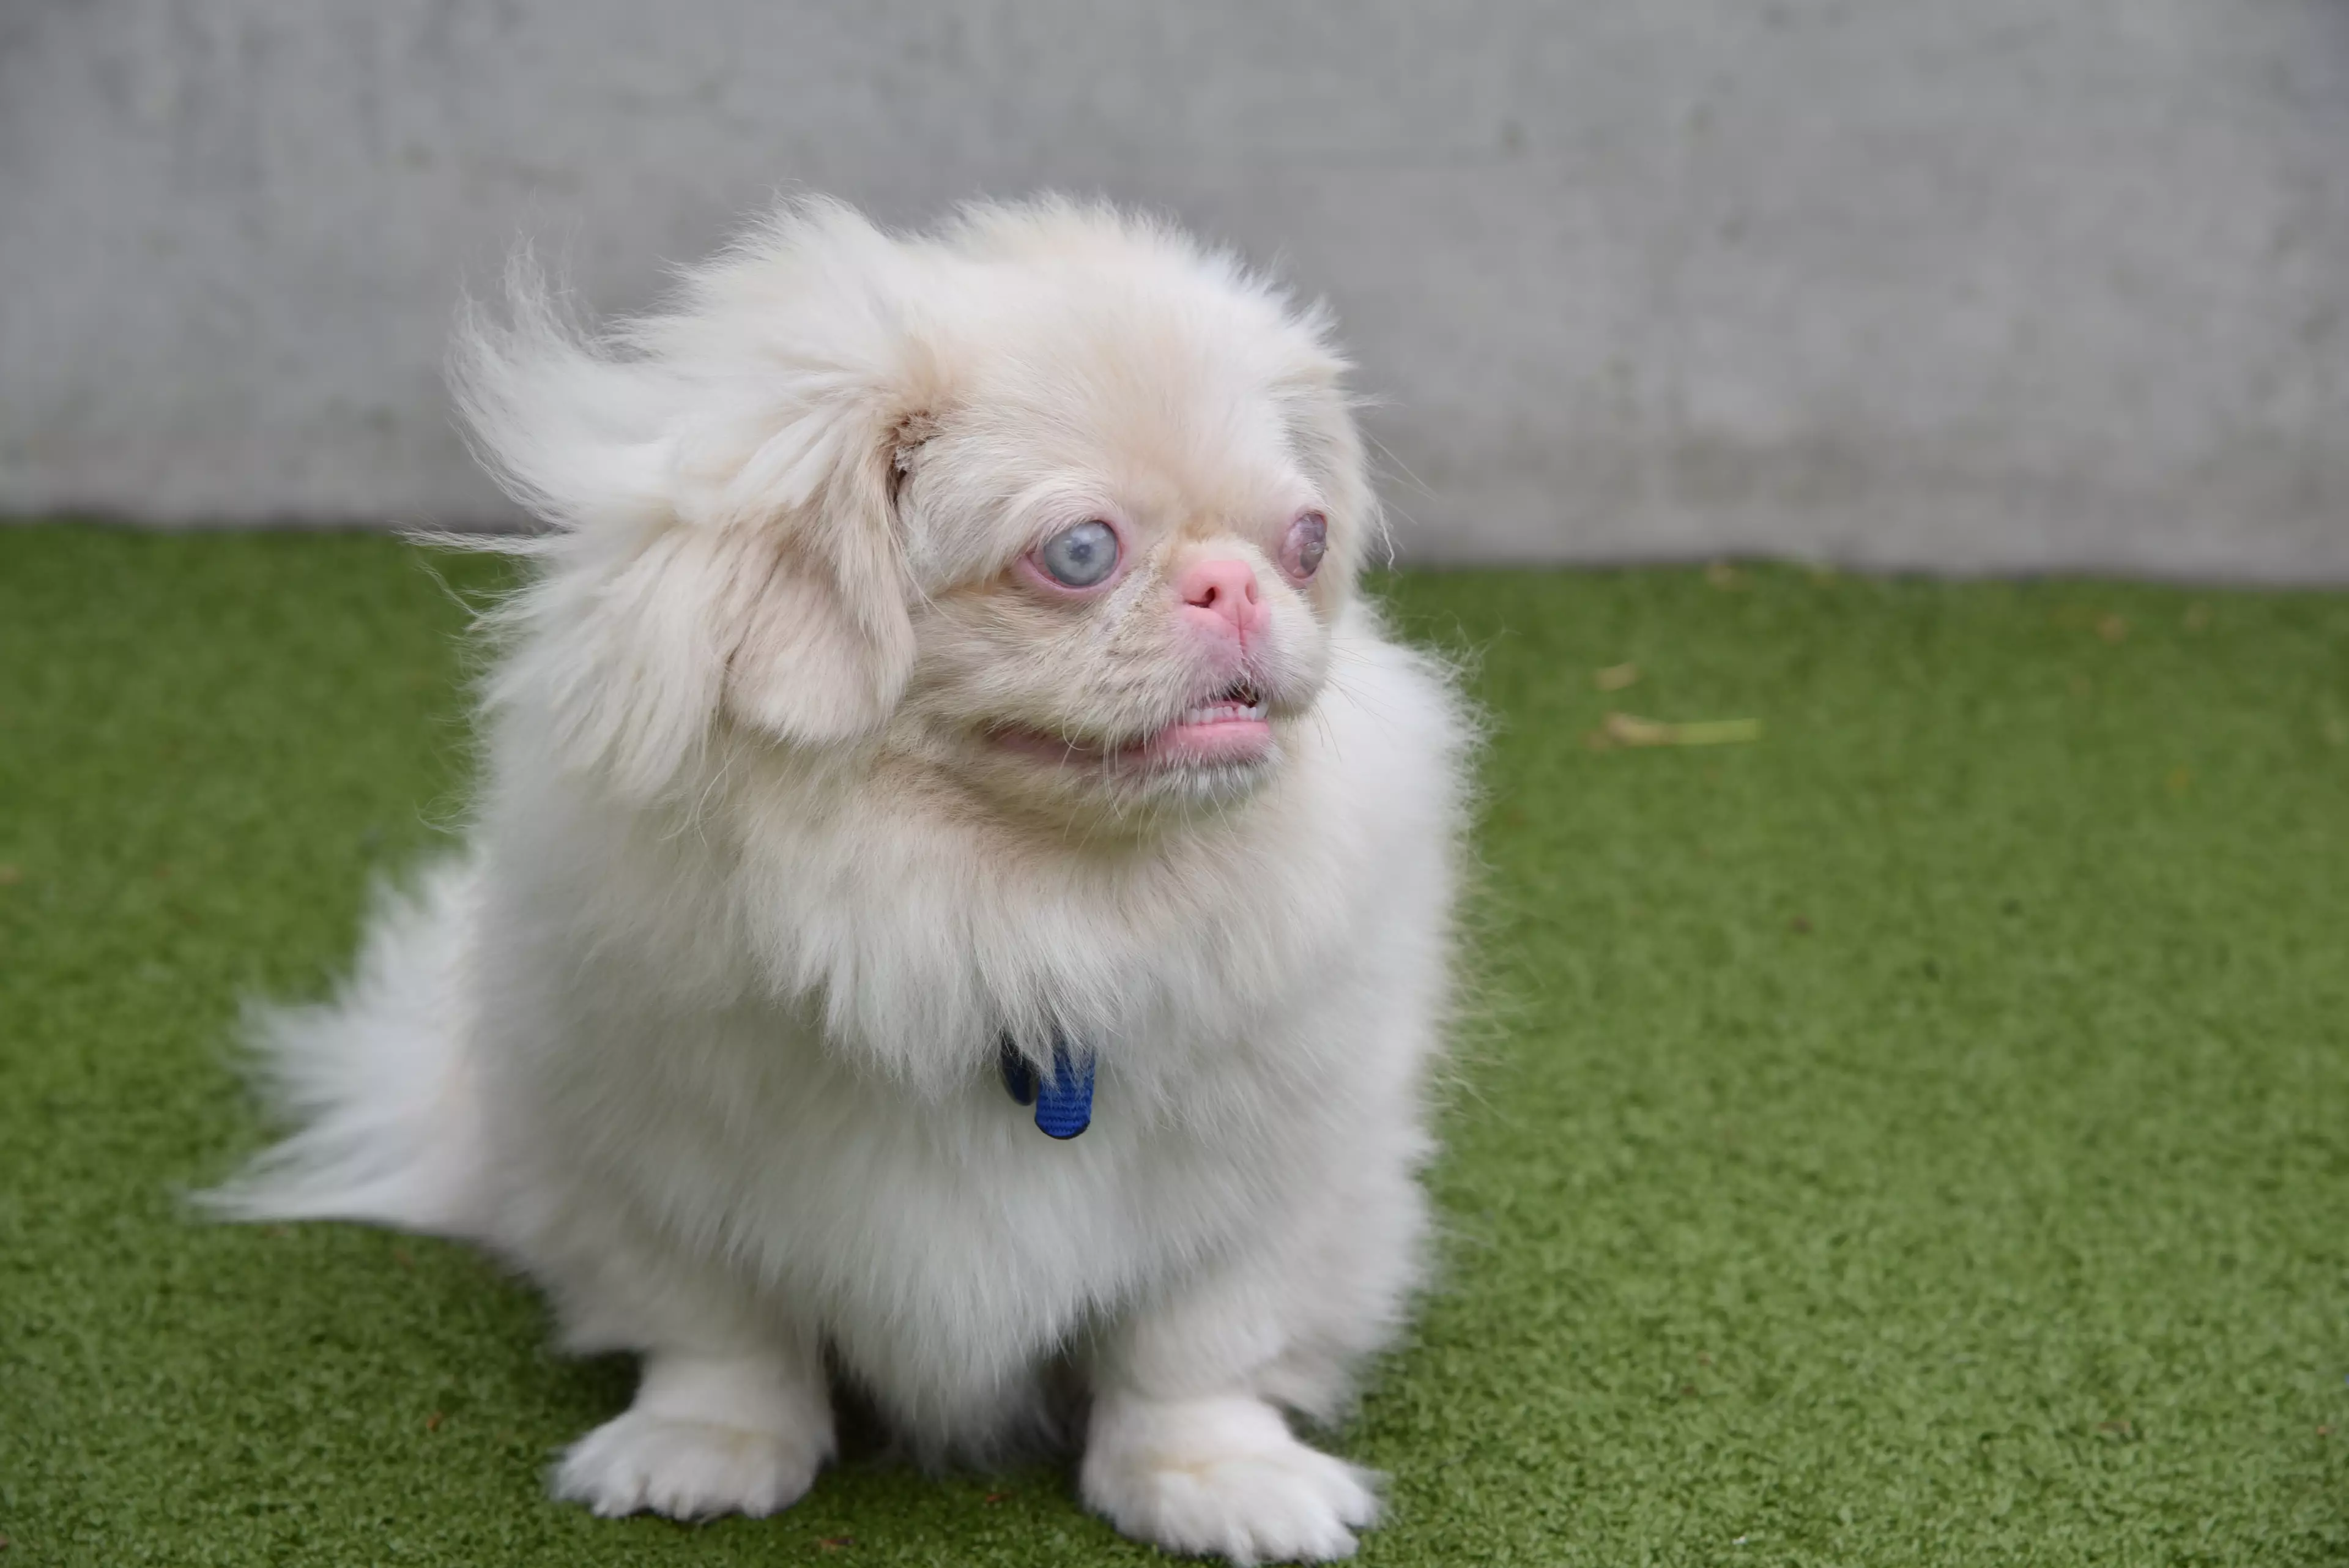 Boo is an albino Pekingese, a breed which originated in China. (